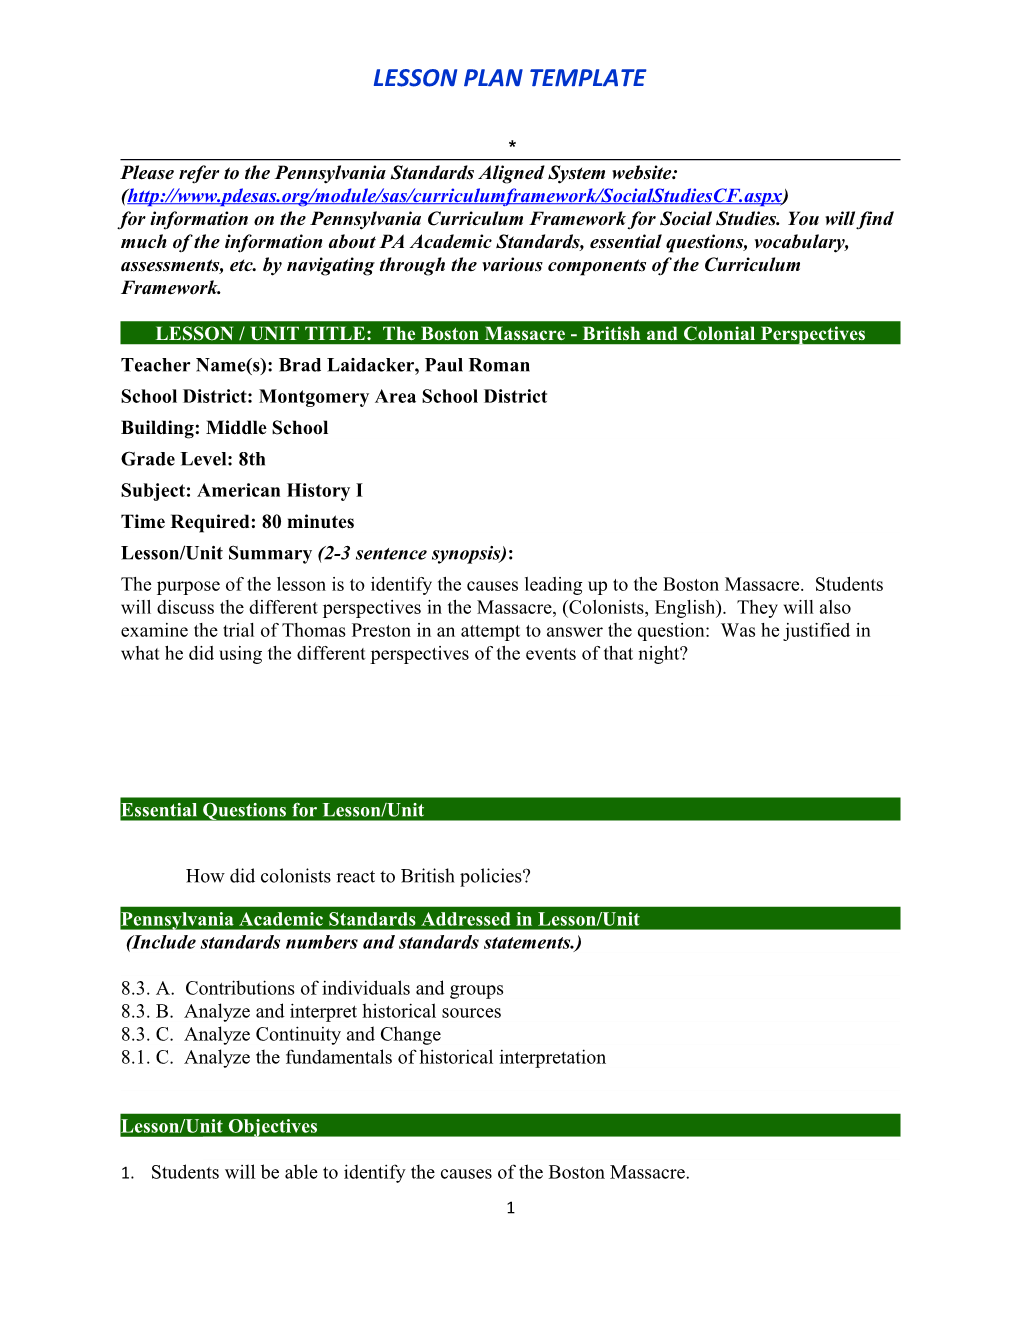 Lesson Plan Template s29